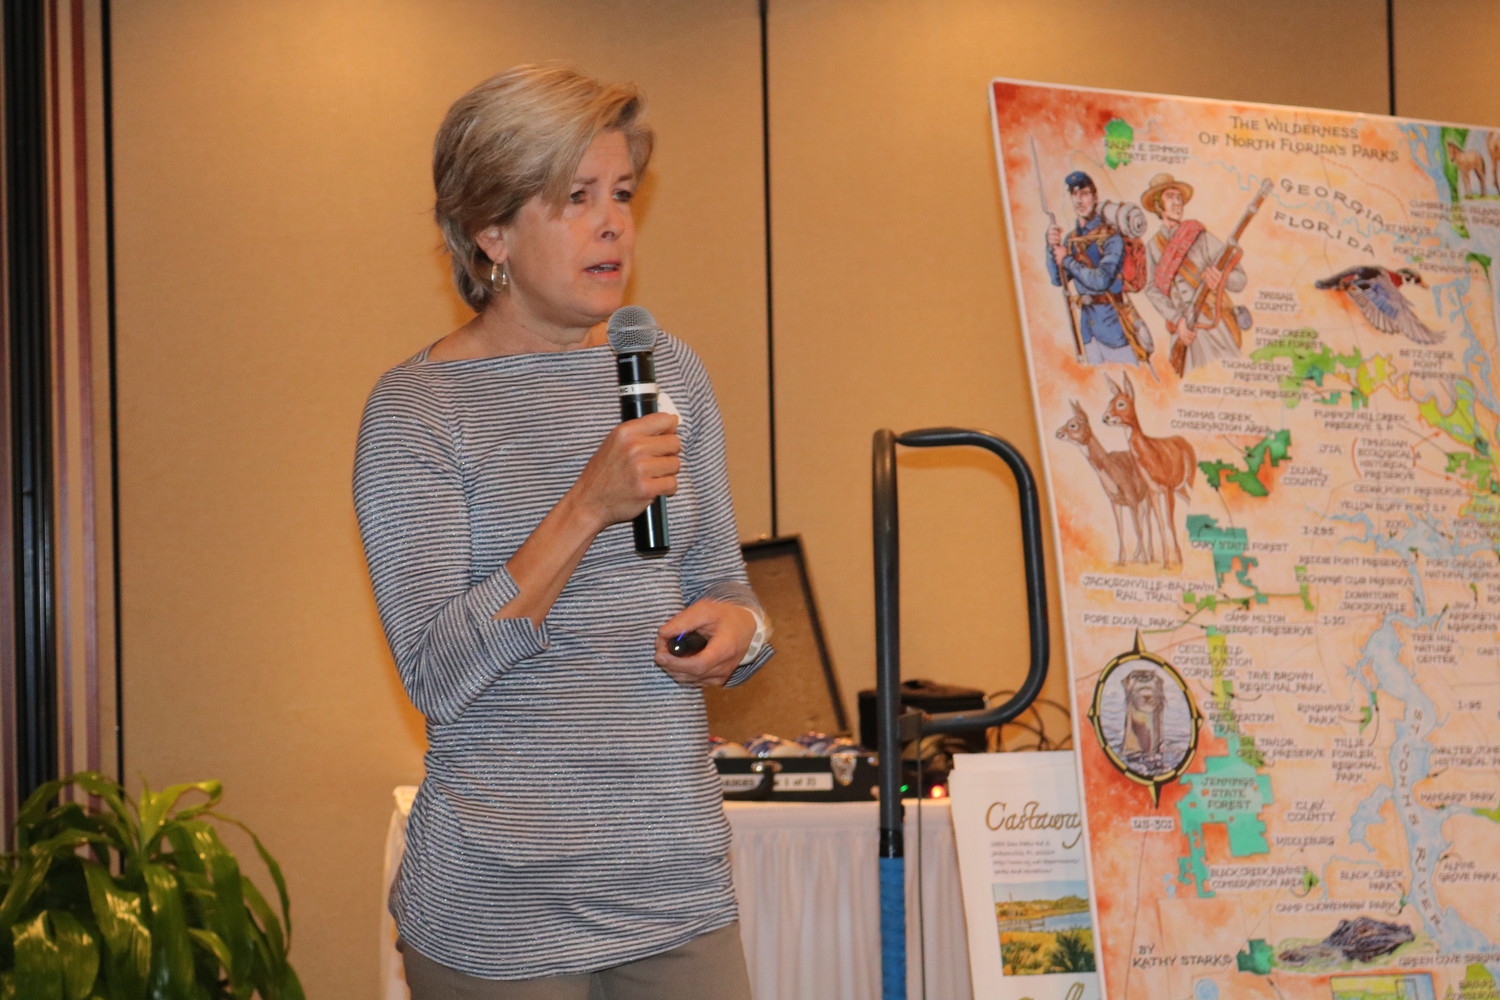 Jacksonville artist Kathy Stark presents her work on the First Coast’s natural parks to the Rotary Club of Ponte Vedra Beach Thursday, Jan. 25.